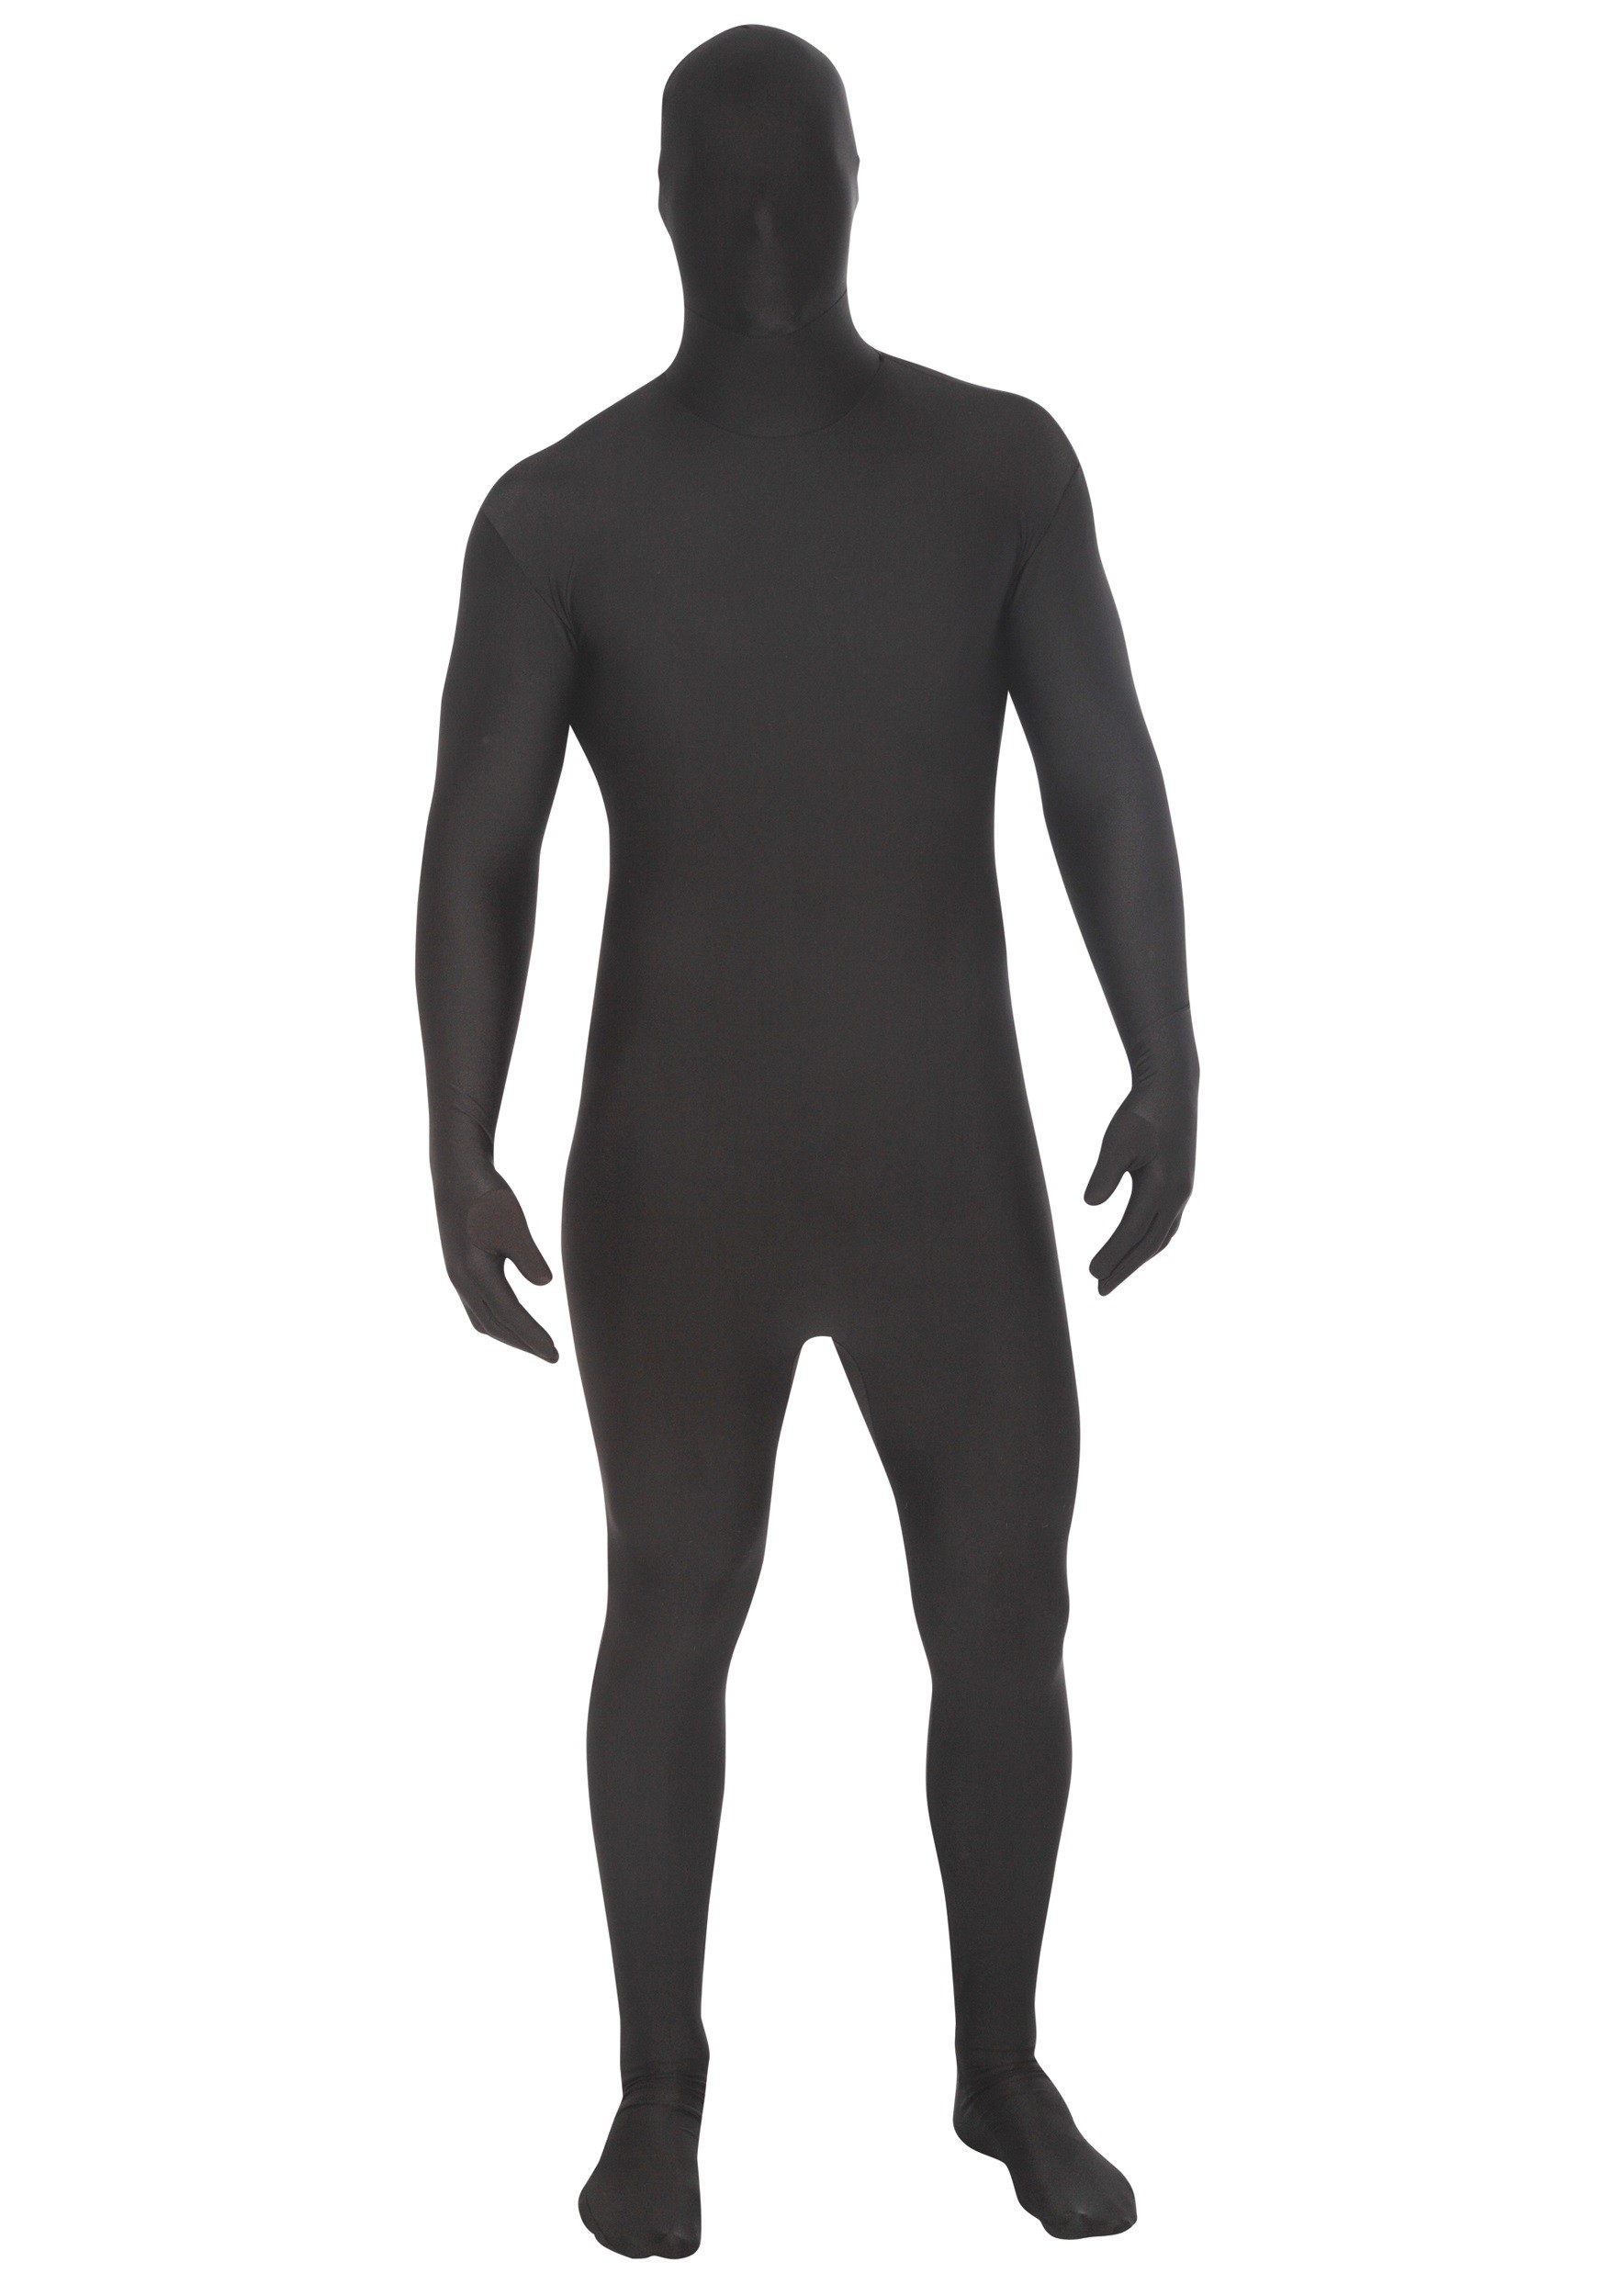 Black Morphsuit Fancy Dress Costume For Adults